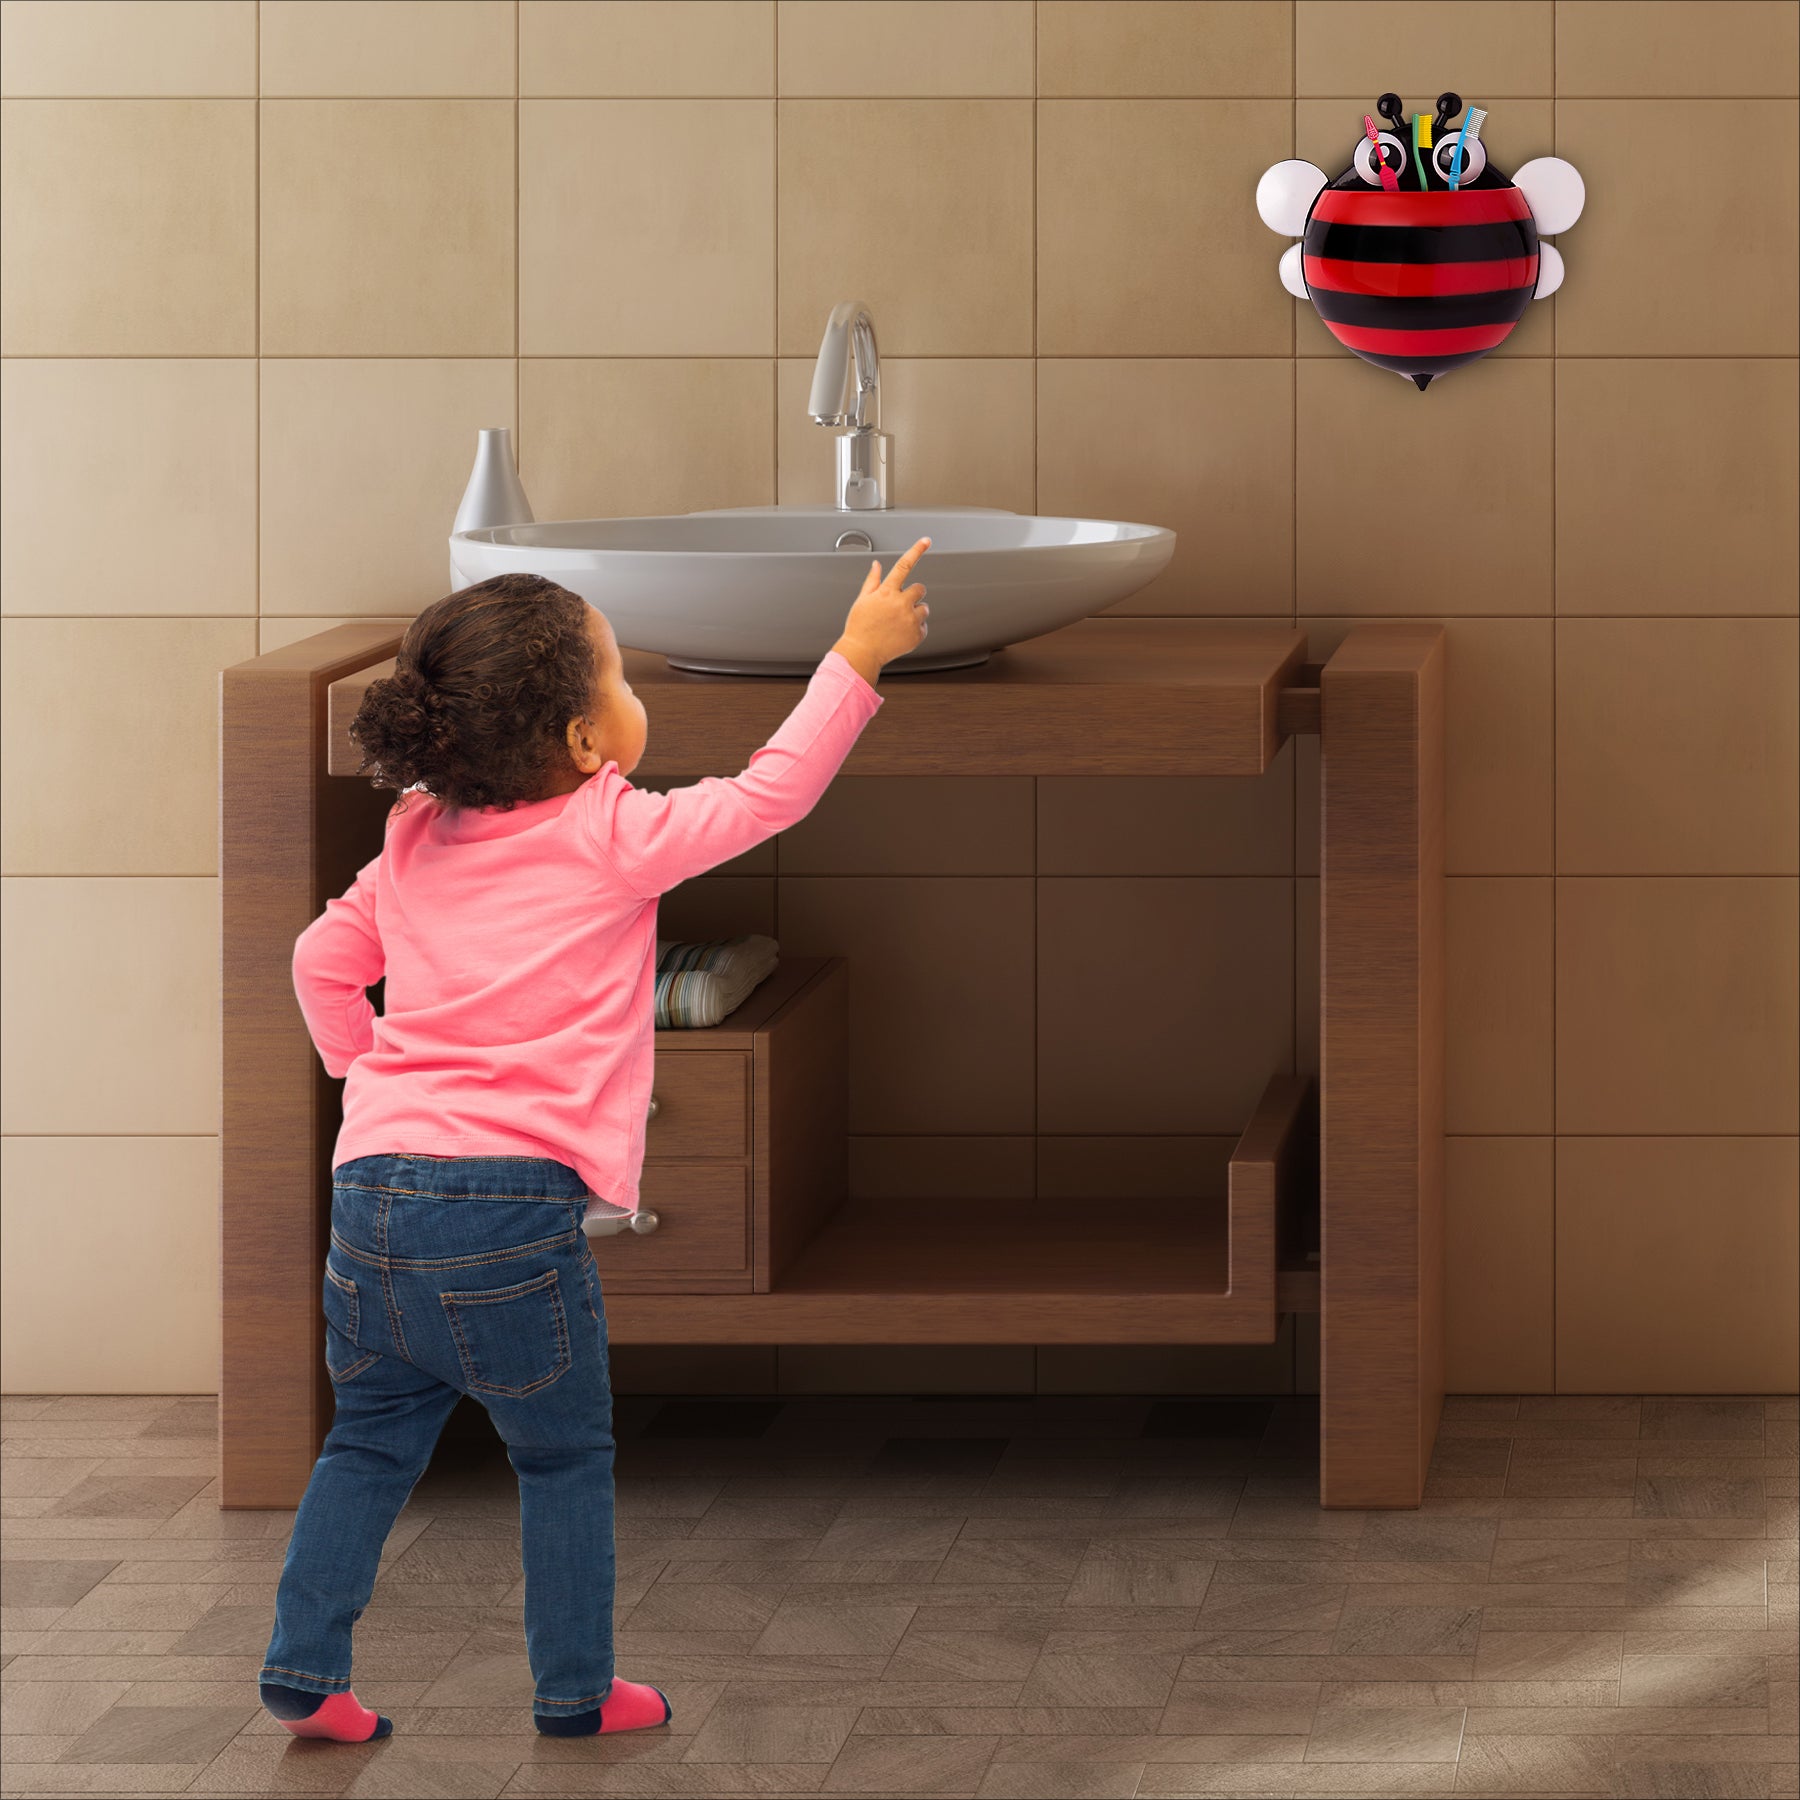 Bee Red Toothbrush Holder - Baby Moo